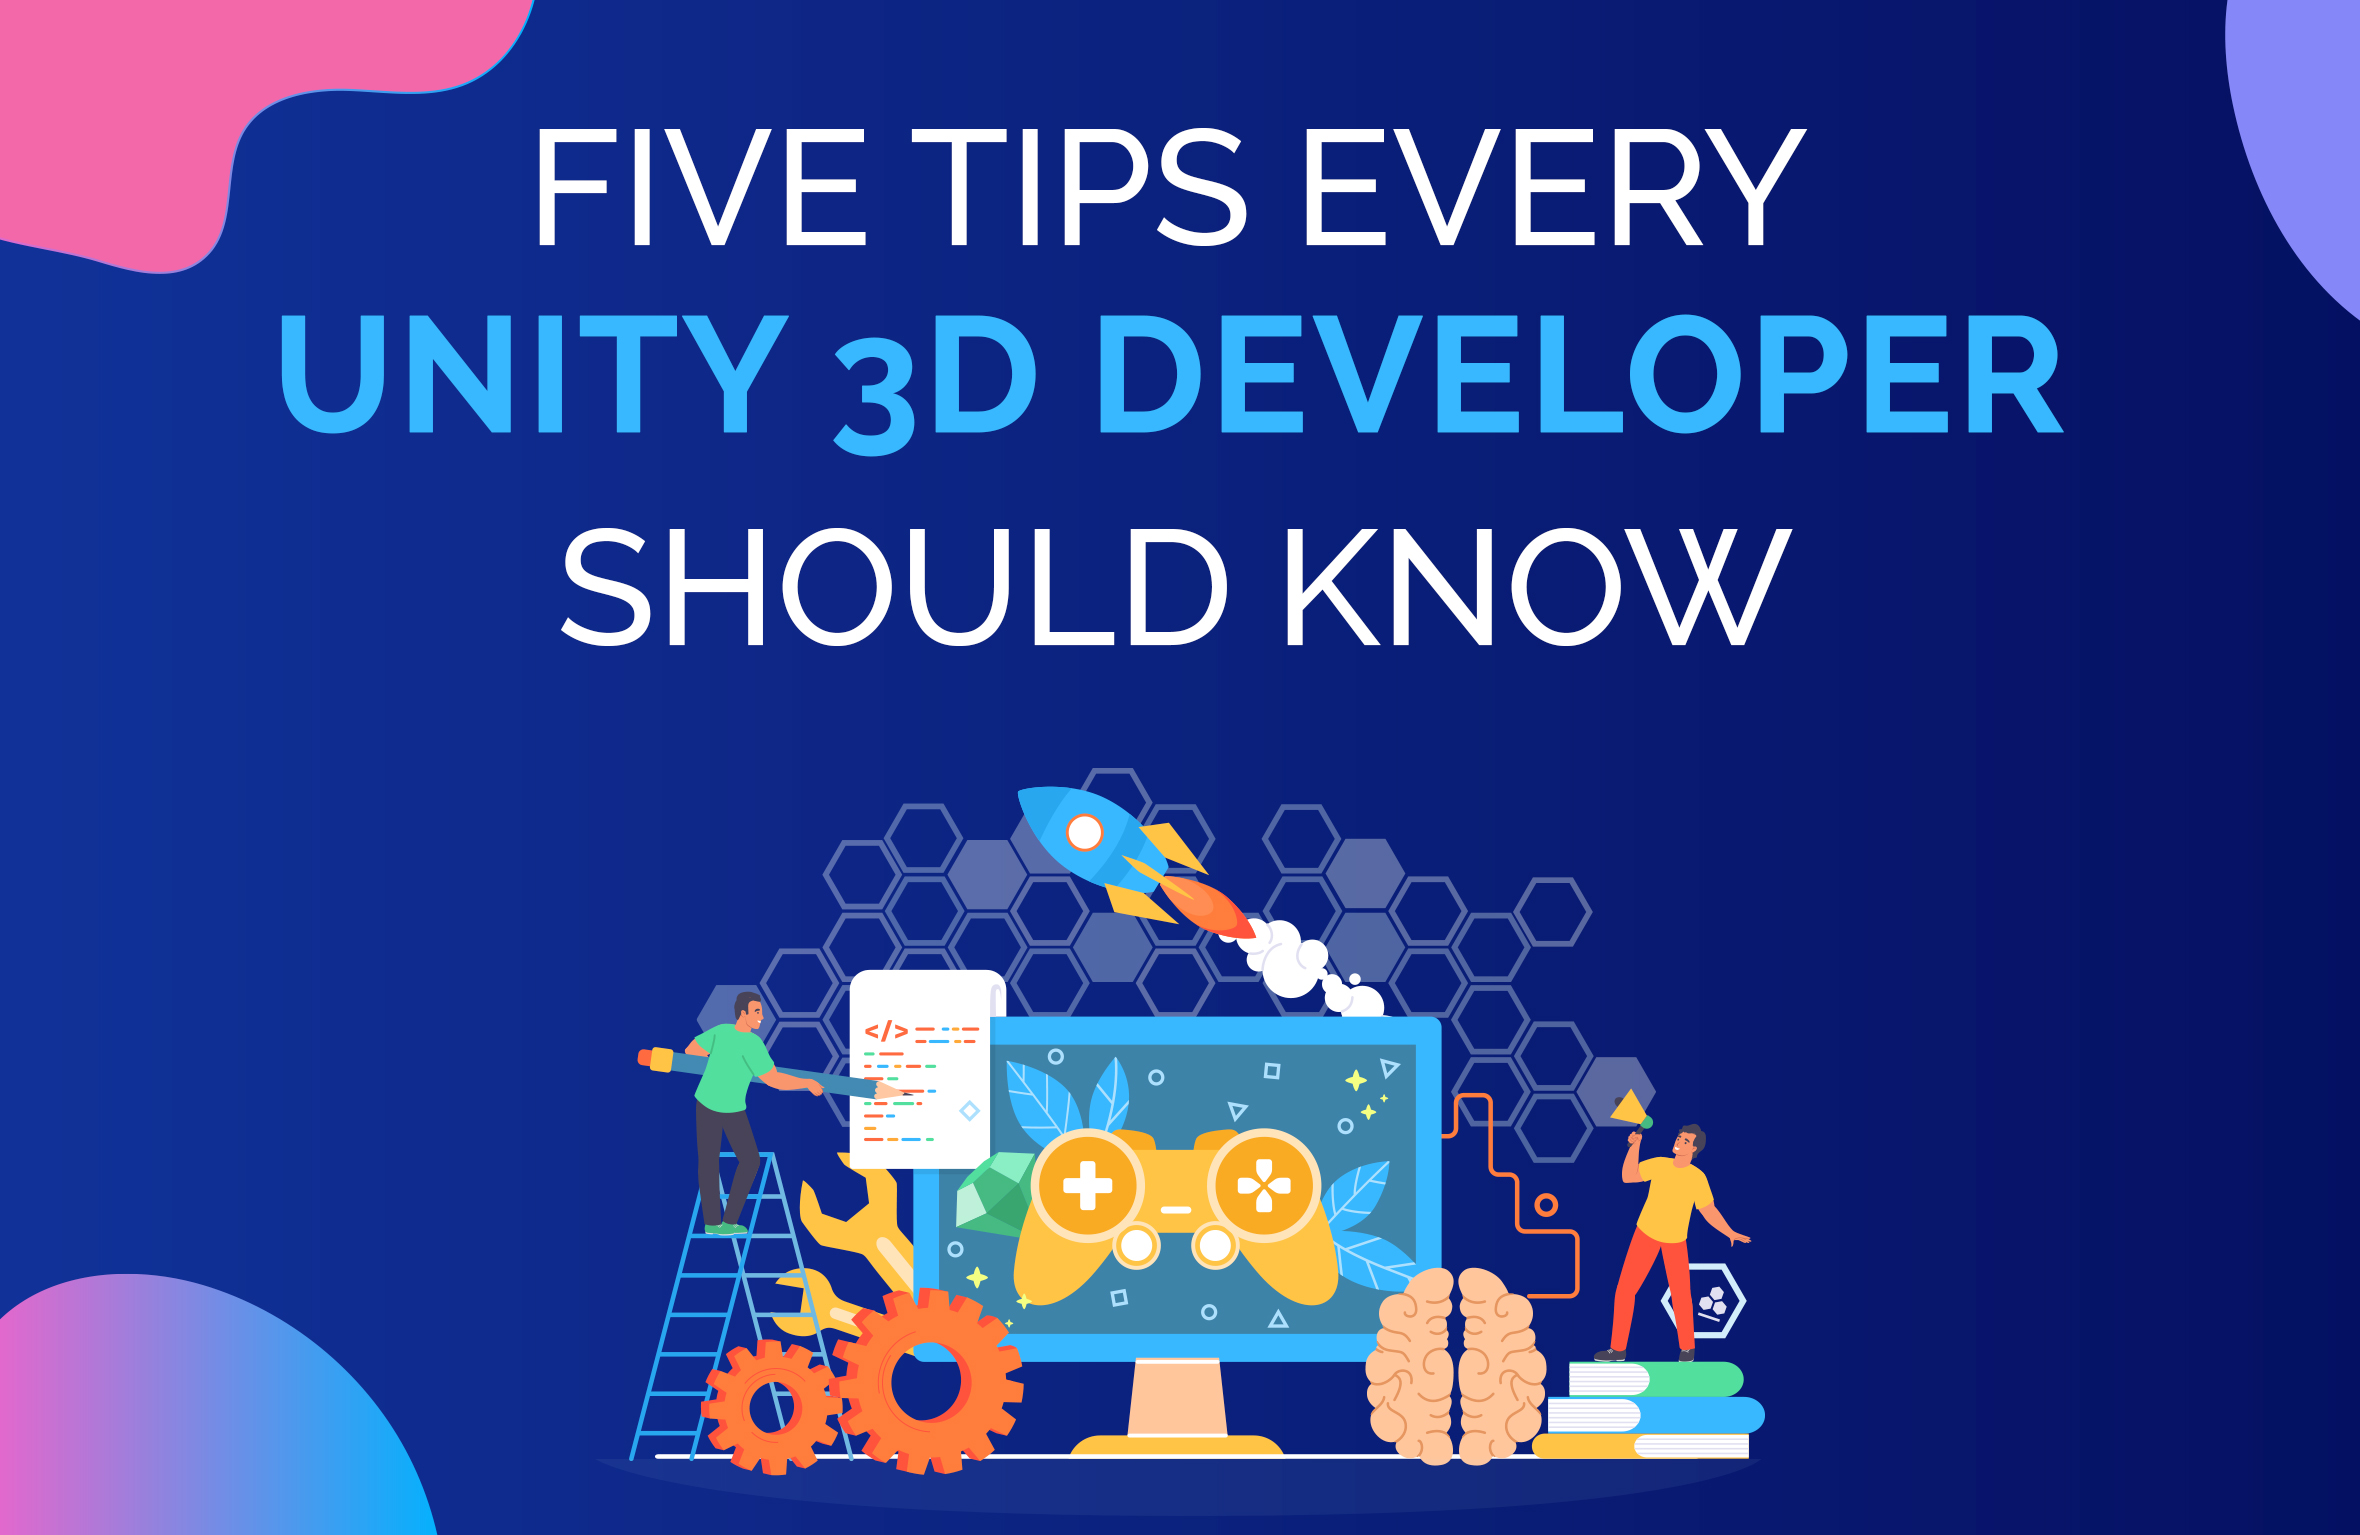 5 tips every Unity 3d developer should know